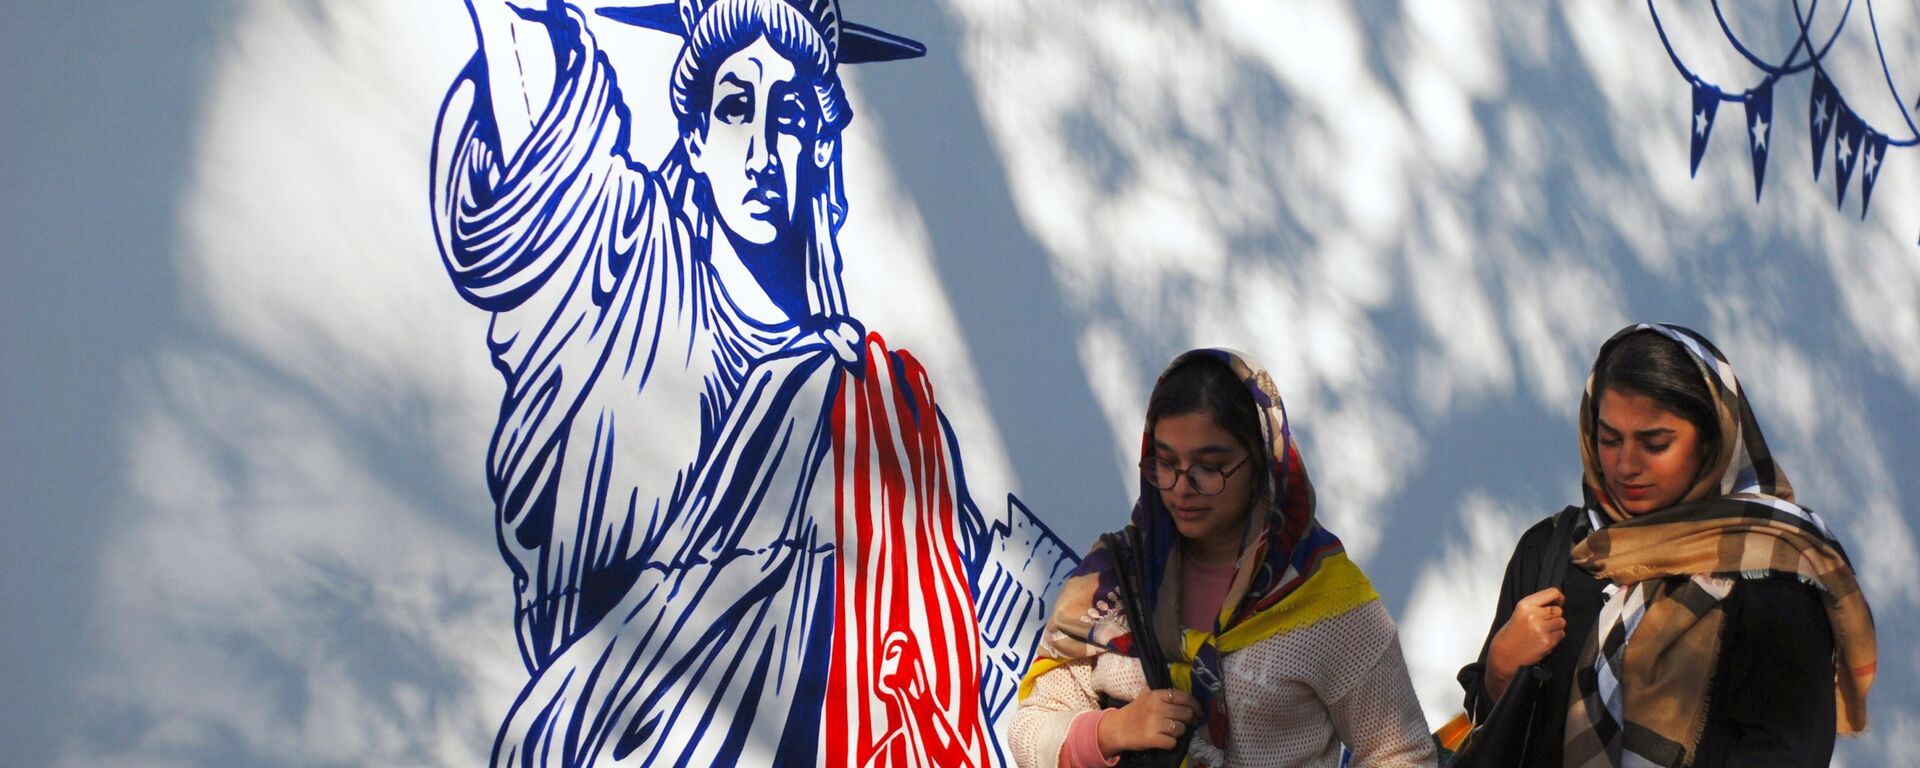 Women walk by a mural on the walls of the former US Embassy compound in Tehran. File photo. - Sputnik International, 1920, 04.09.2021